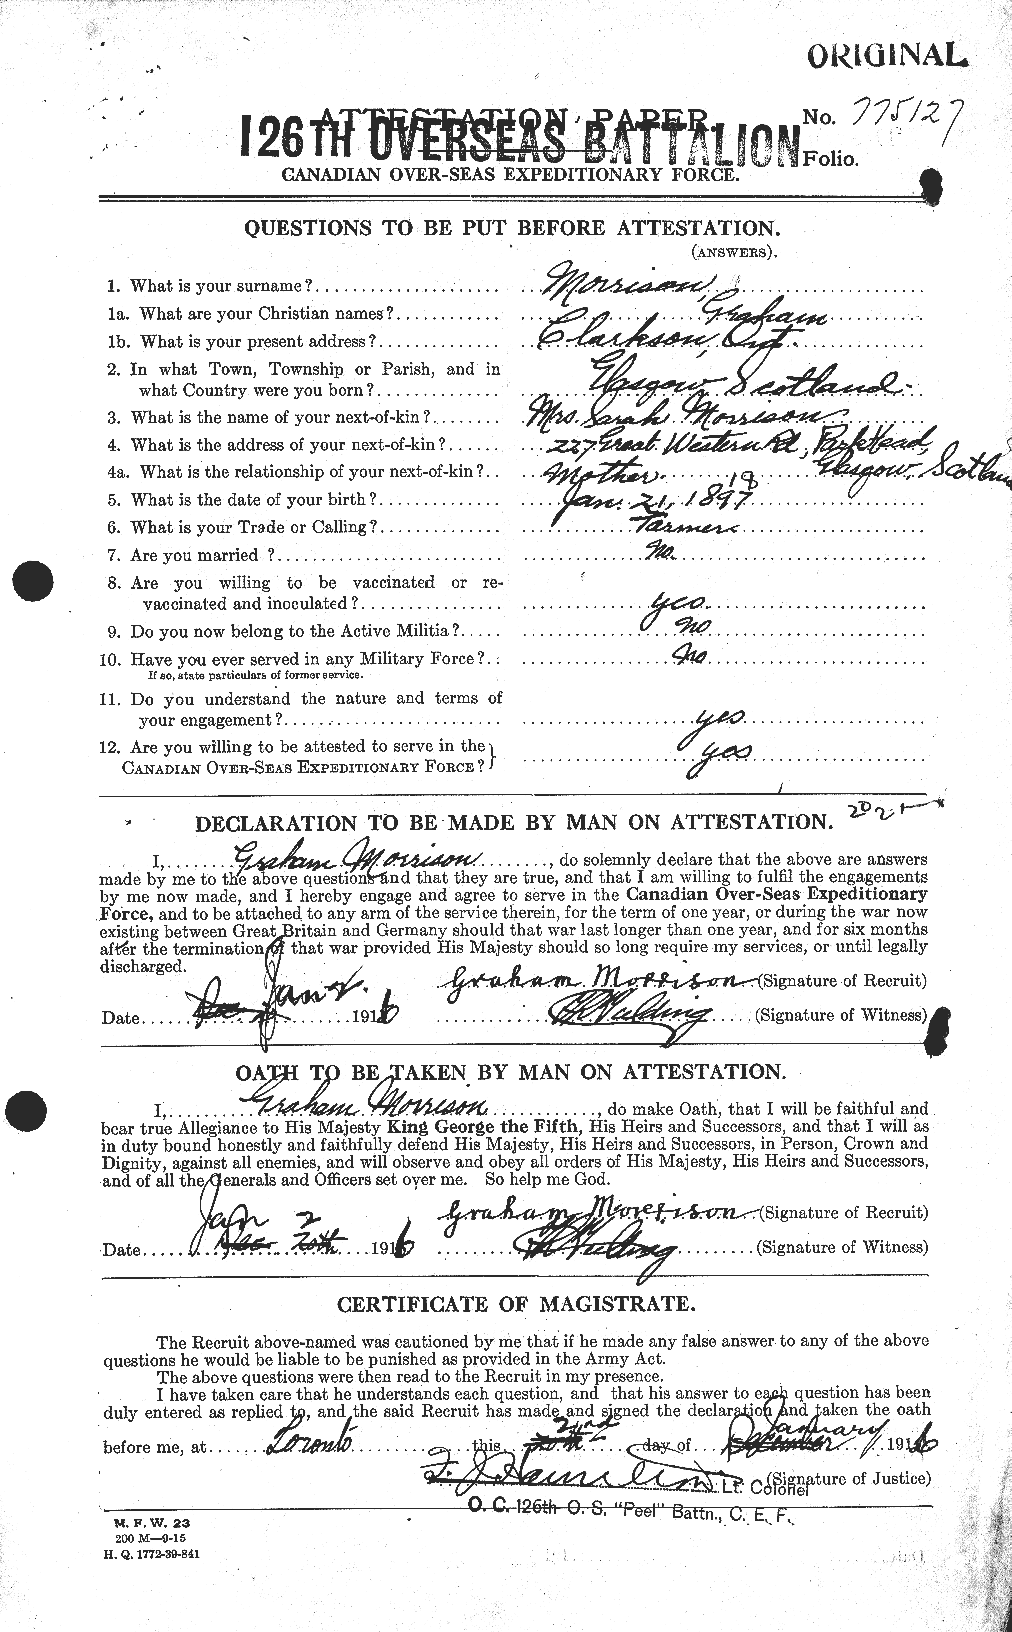 Personnel Records of the First World War - CEF 506831a